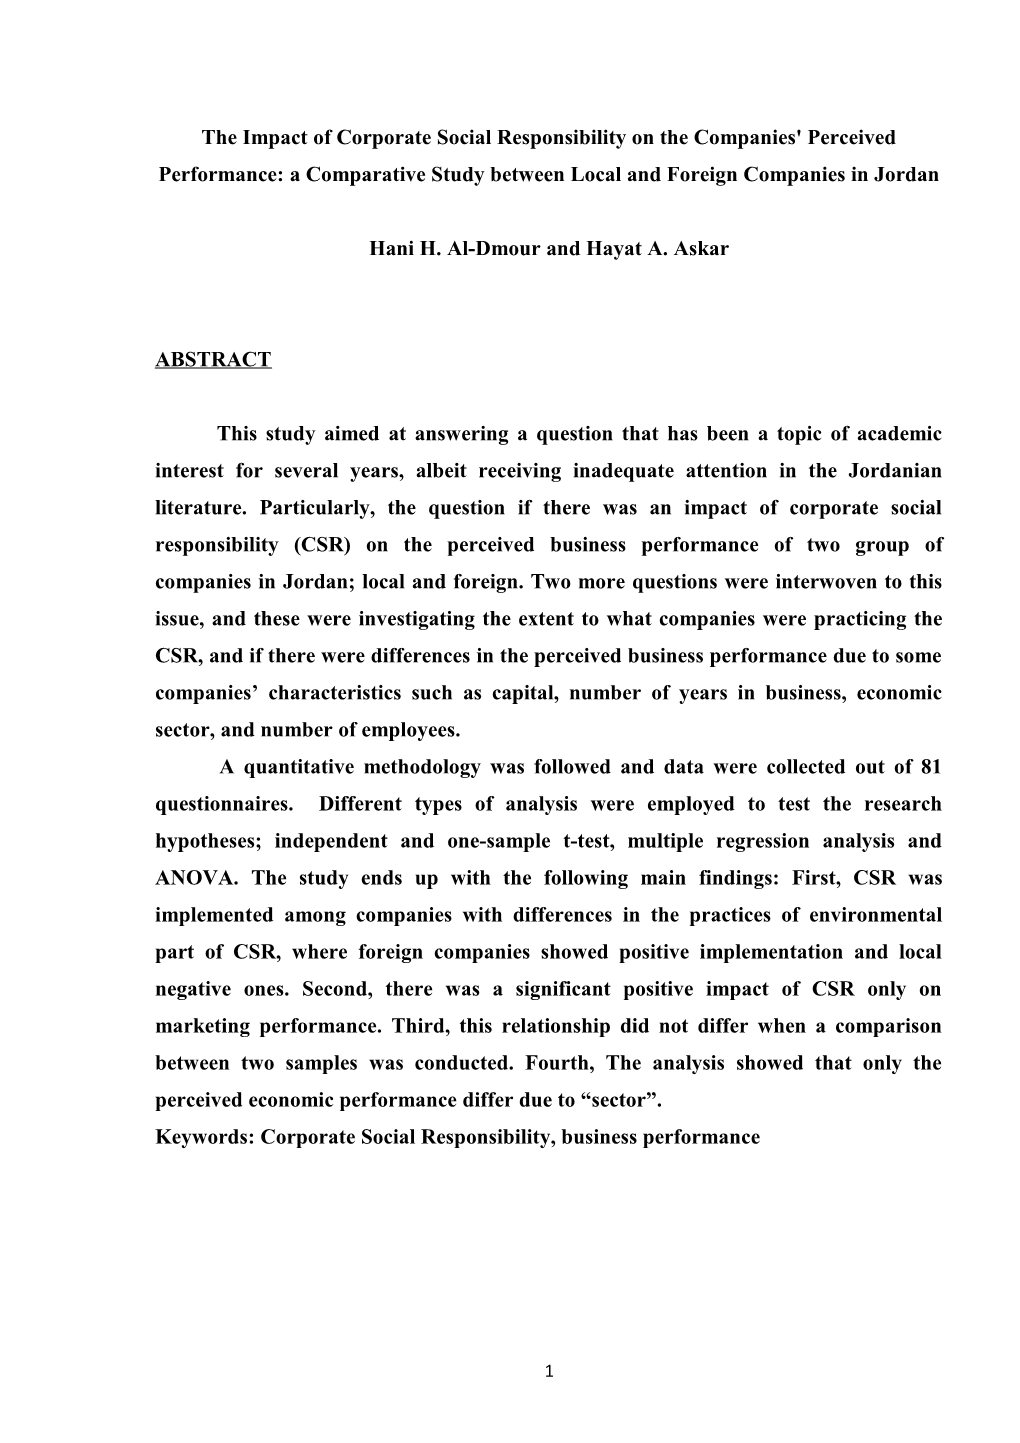 The Impact Of Corporate Social Responsibility On The Companies' Perceived Performance: A Comparative Study Between Local And Foreign Companies In Jordan